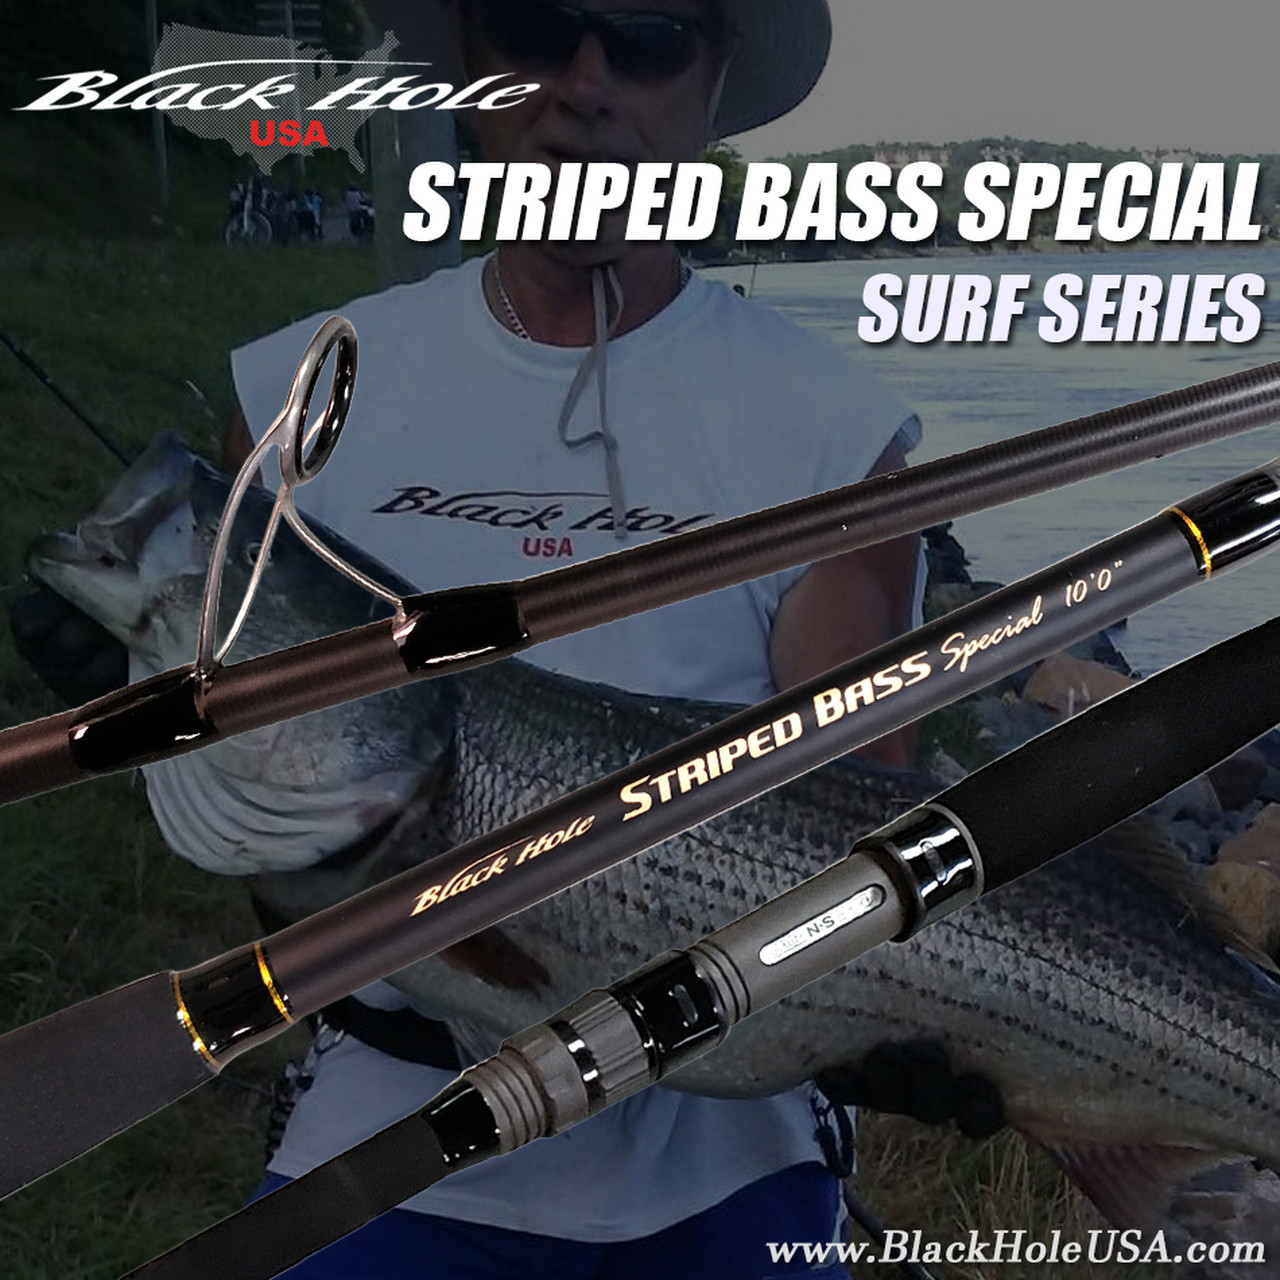 https://cdn11.bigcommerce.com/s-7z0dxjb/images/stencil/1280x1280/products/784/4231/BH_STRIPED_BASS_ROD_FRONT__00035.1588710811__52579.1597880332.jpg?c=2